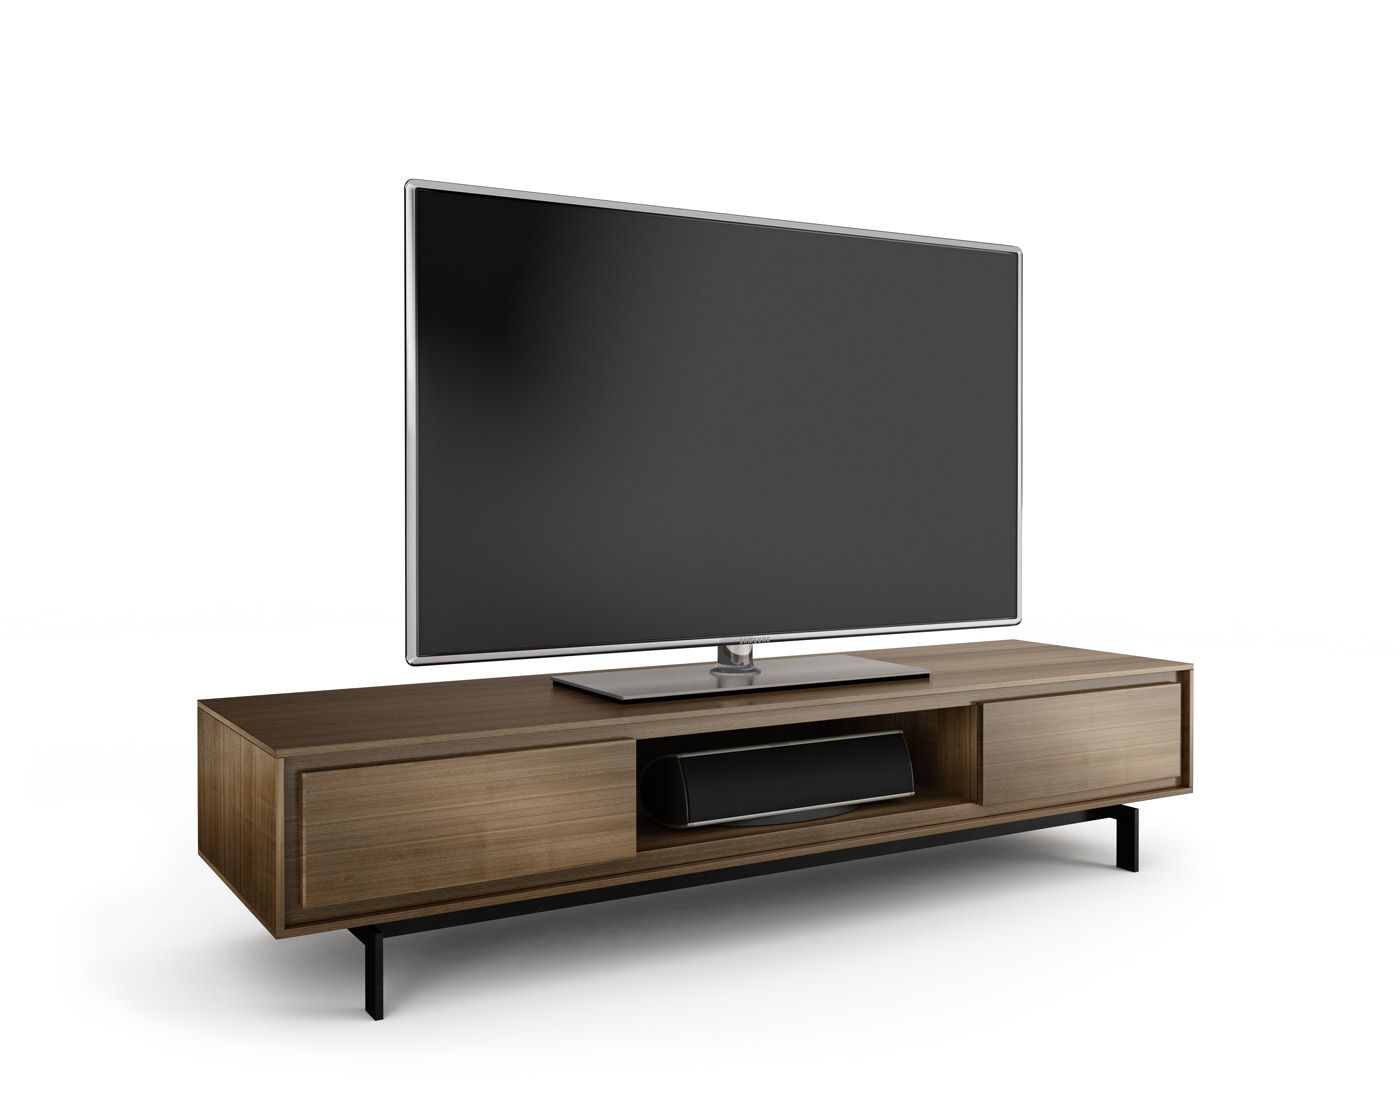 Signal 8323 Tv Stand – Bdi Designer Tv Stands And Cabinets Pertaining To Long Low Tv Stands (View 12 of 15)